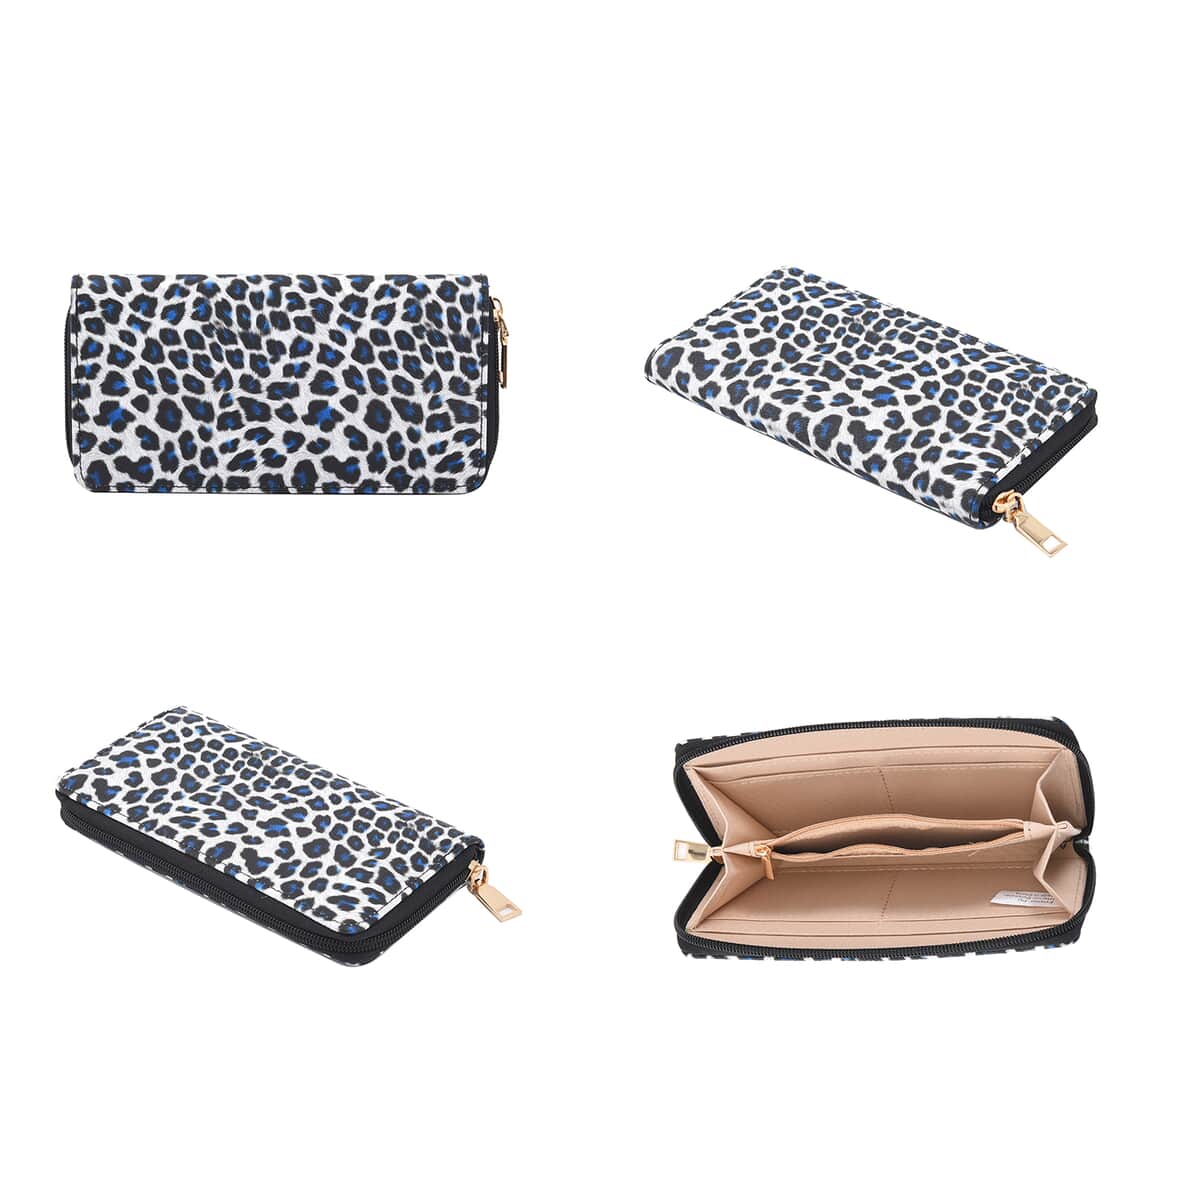 Passage White, Black and Blue Leopard Pattern Faux Leather Tote Bag Crossbody Bag, Clutch Bag and Wallet image number 5